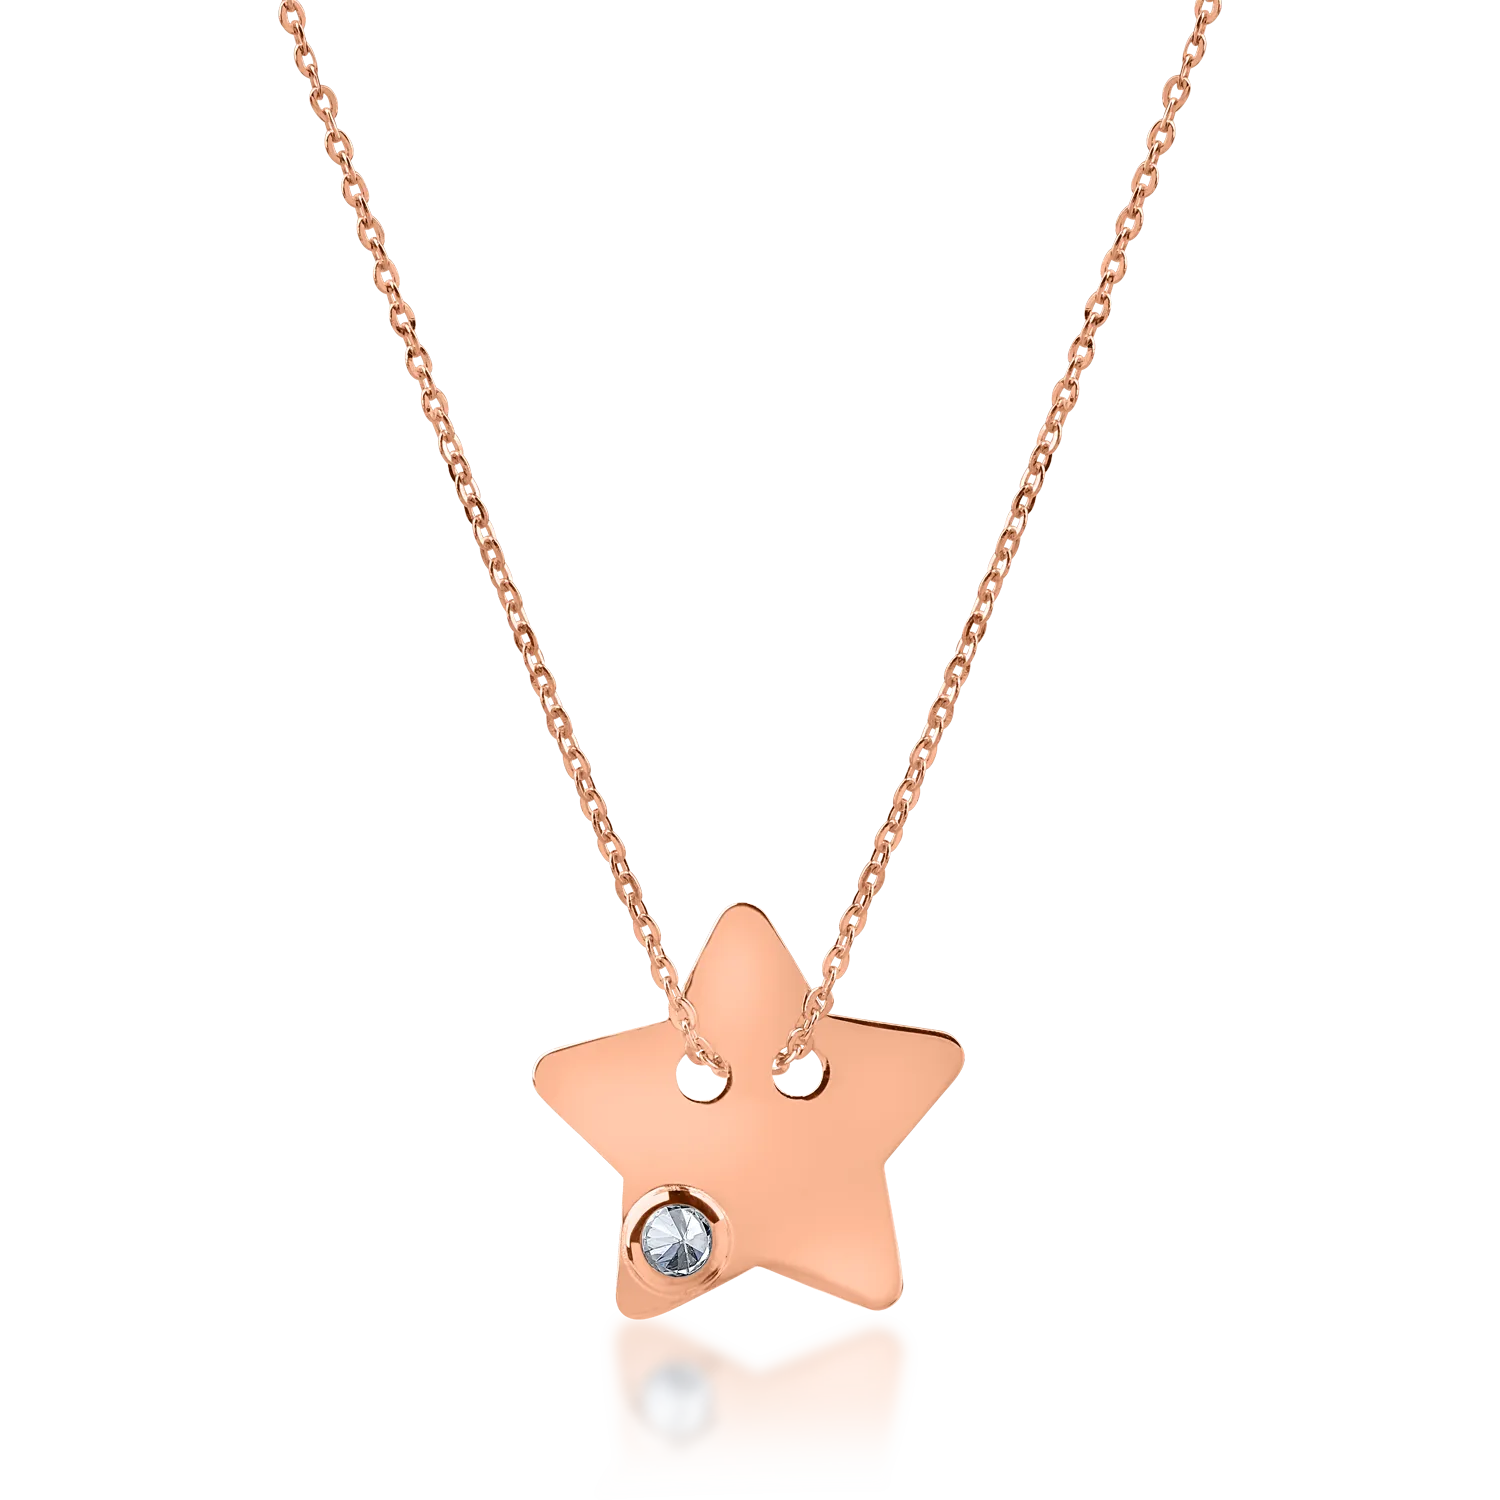 Rose gold star pendant necklace with zirconia